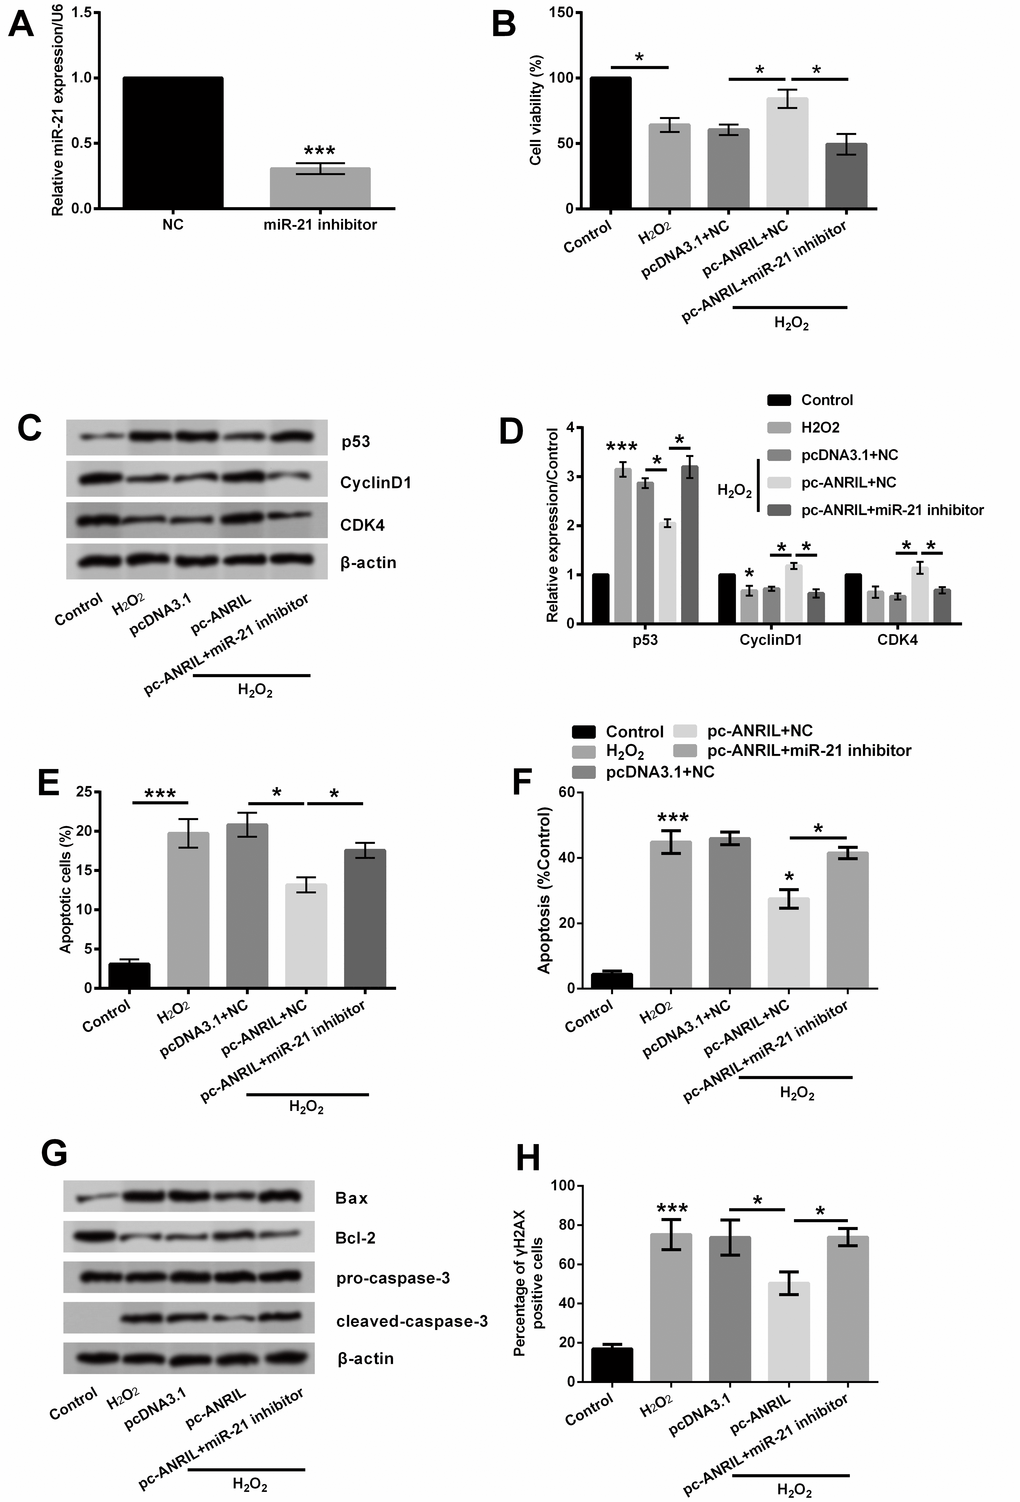 miR-21 inhibition reversed the effects of lncRNA ANRIL on H2O2-treated HLECs. HLEC SRA01/04 cells were transfected with inhibitor-NC or miR-21 inhibitor, and untransfected cells were acted as control. (A) Expression of miR-21 was determined by RT-qPCR. Cells co-transfected with pcDNA3.1 (pc-ANRIL) and miR-21 inhibitor (inhibitor-NC) or untransfected cells were treated with 400 μM H2O2, and non-treated cells were acted as control. (B) Cell viability was measured by CCK-8 assay. (C, D) Expression of p53, cyclinD1 and CDK4 was testified by Western blot analysis. (E, F) Percentage of apoptotic cells was quantified by flow cytometry assay. (G) Expression of proteins related to apoptosis was detected by Western blot analysis. (H) γH2AX staining for detection of DNA levels. Data are shown as the mean ± SD of three independent experiments. *, P P 